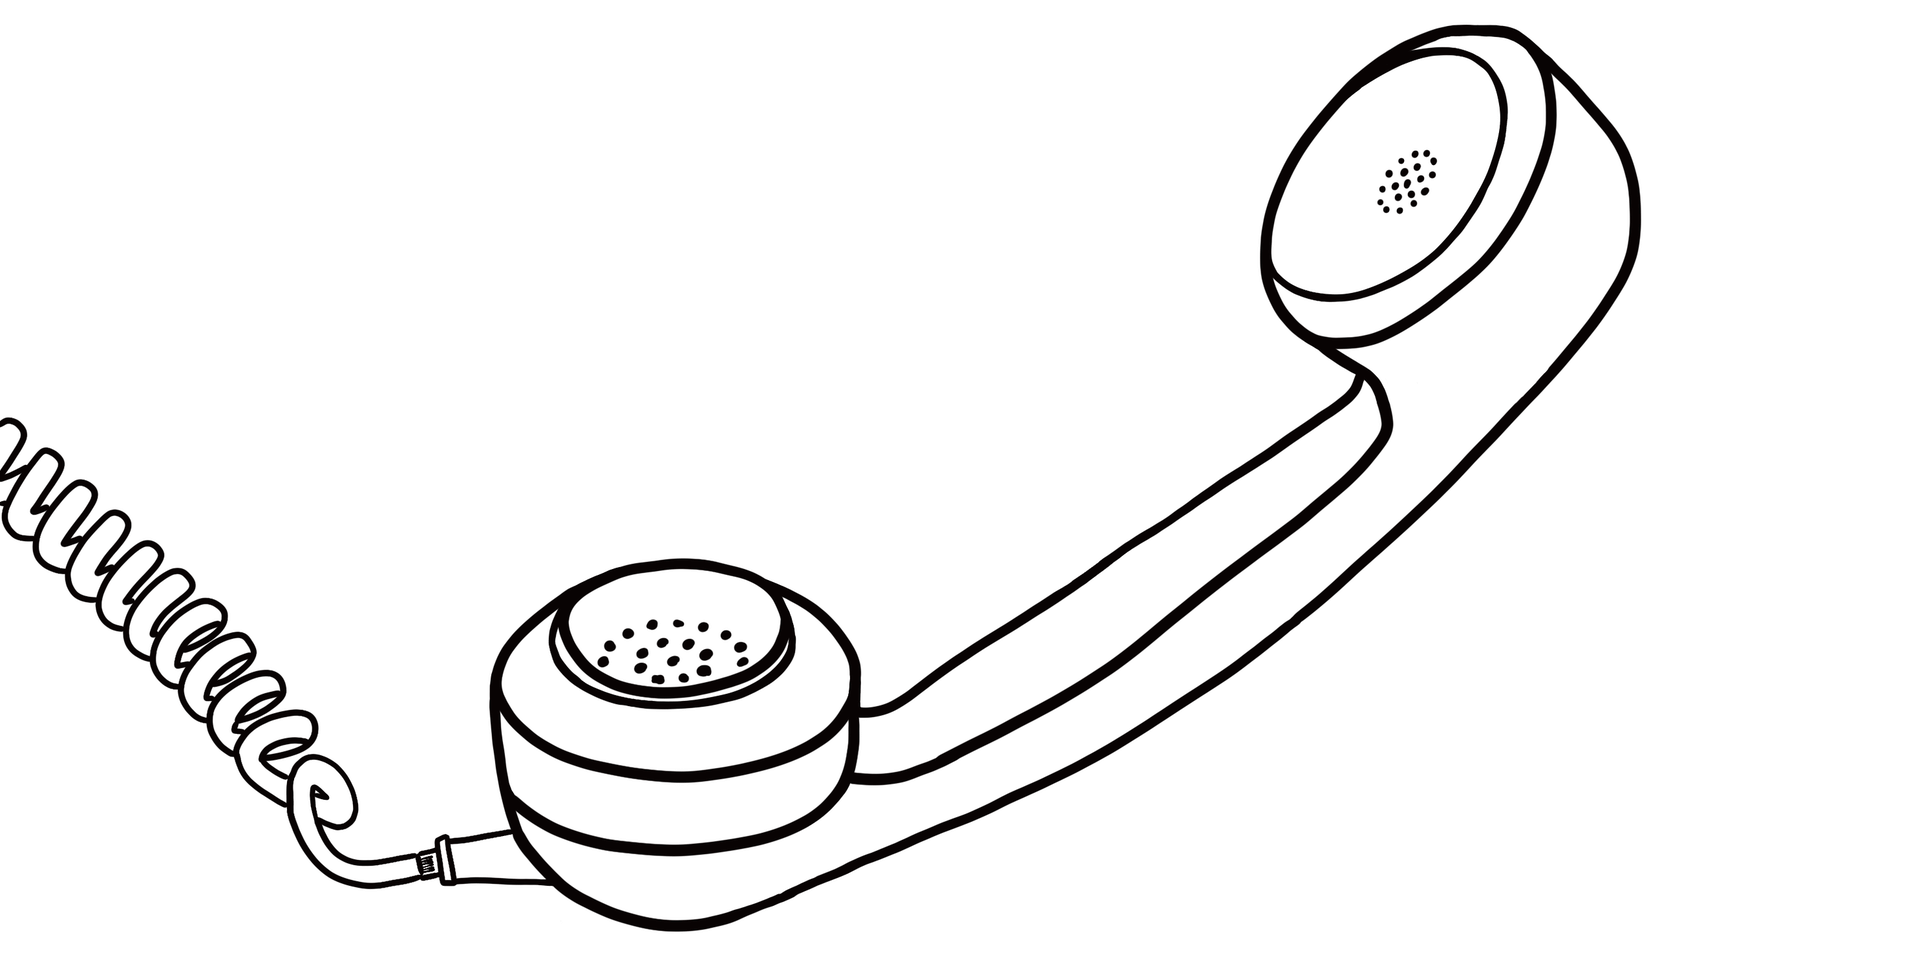 Illustration of an old school telephone handle with cable